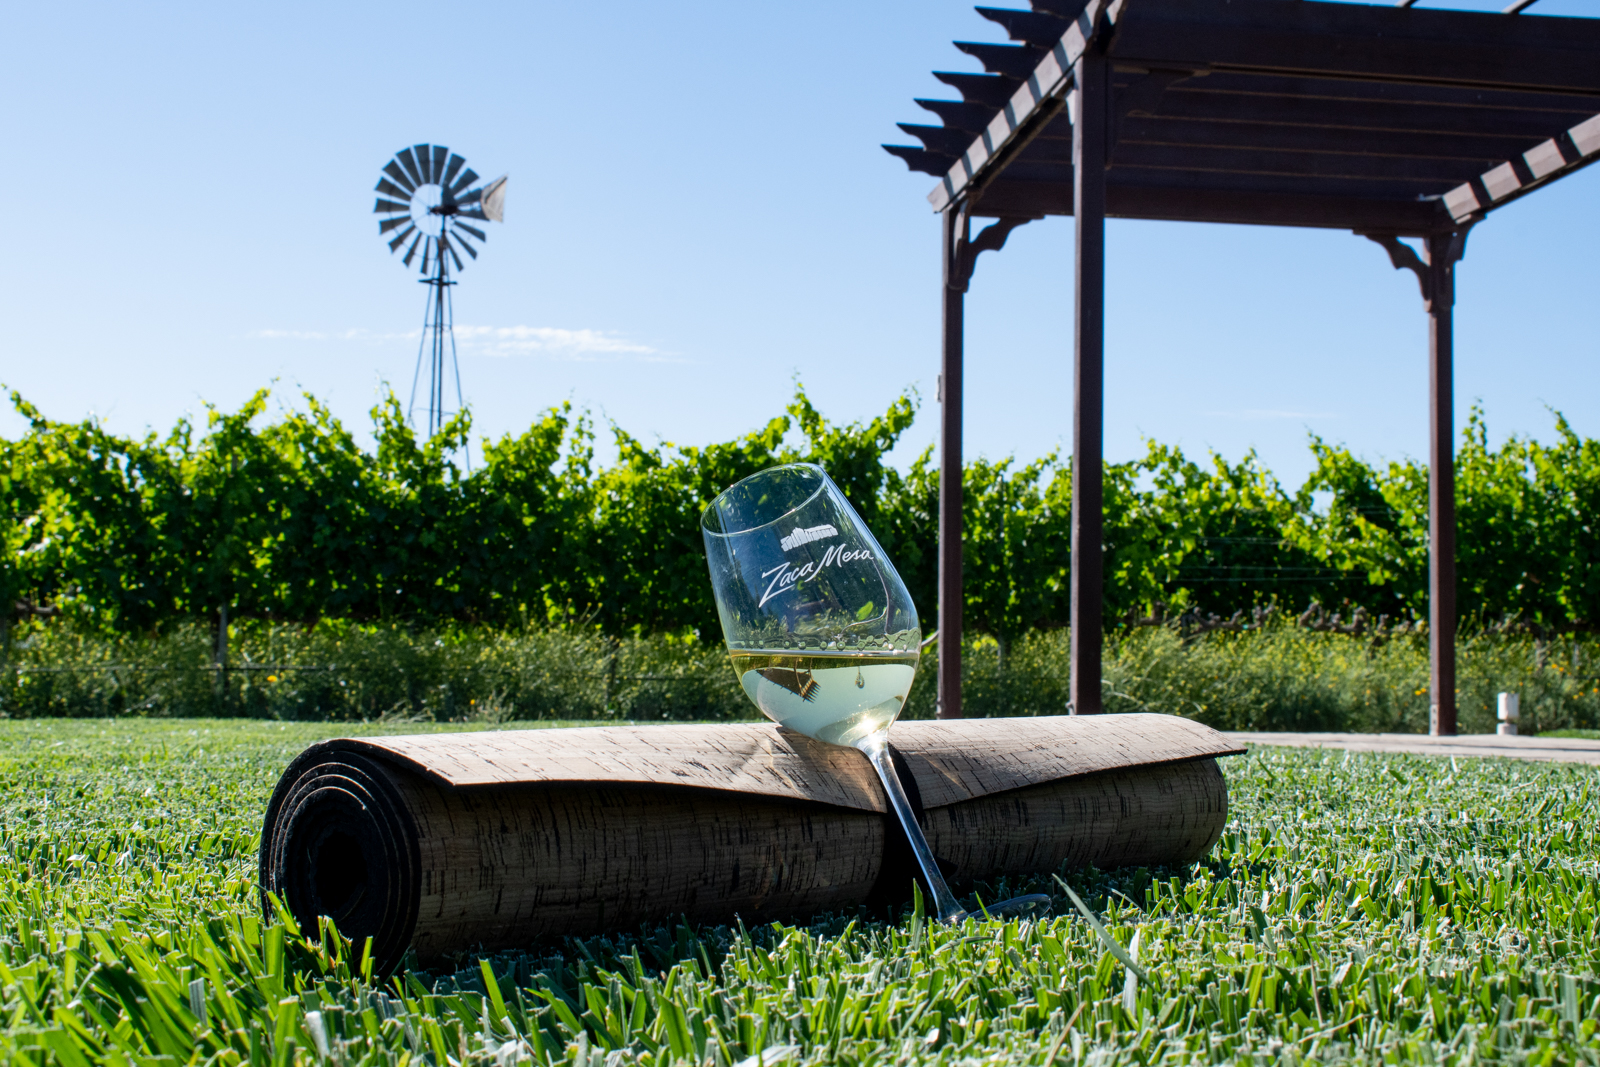 Yoga mat and glass of wine on the grass in front of the vineyard